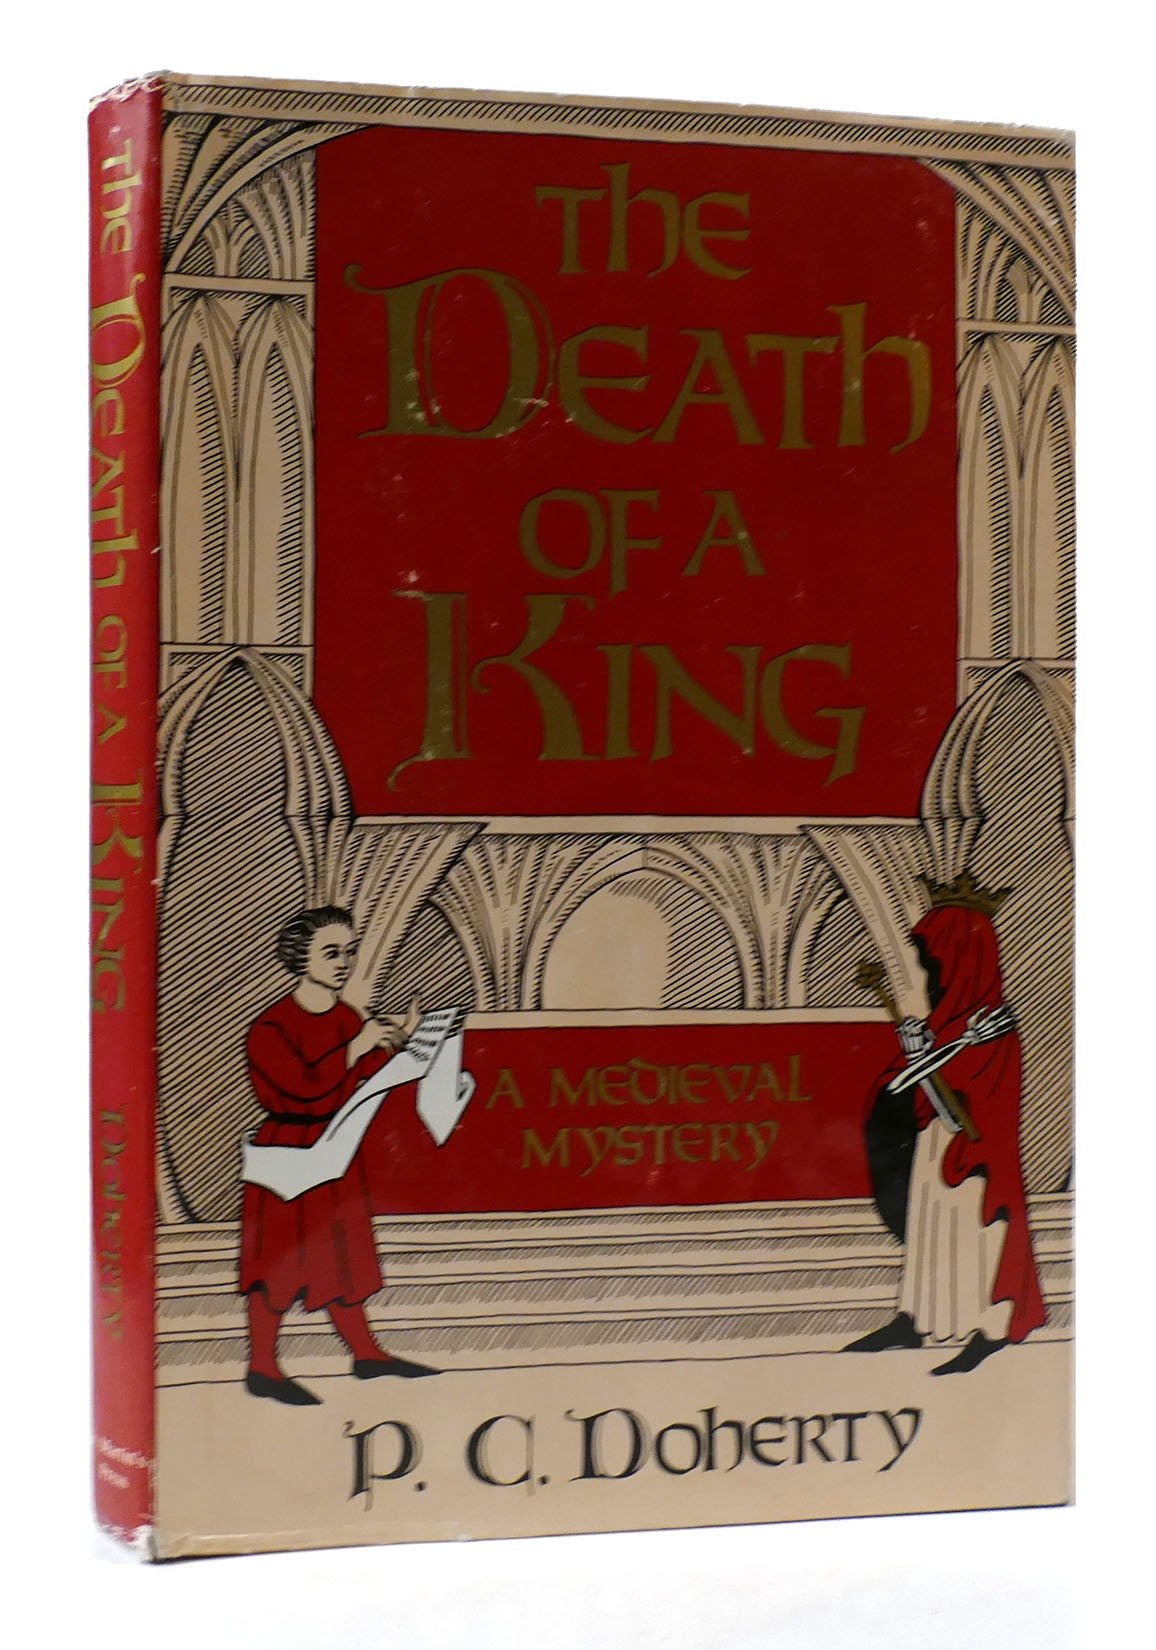 THE DEATH OF A KING: A MEDIEVAL MYSTERY | P. C. Doherty | First Edition ...